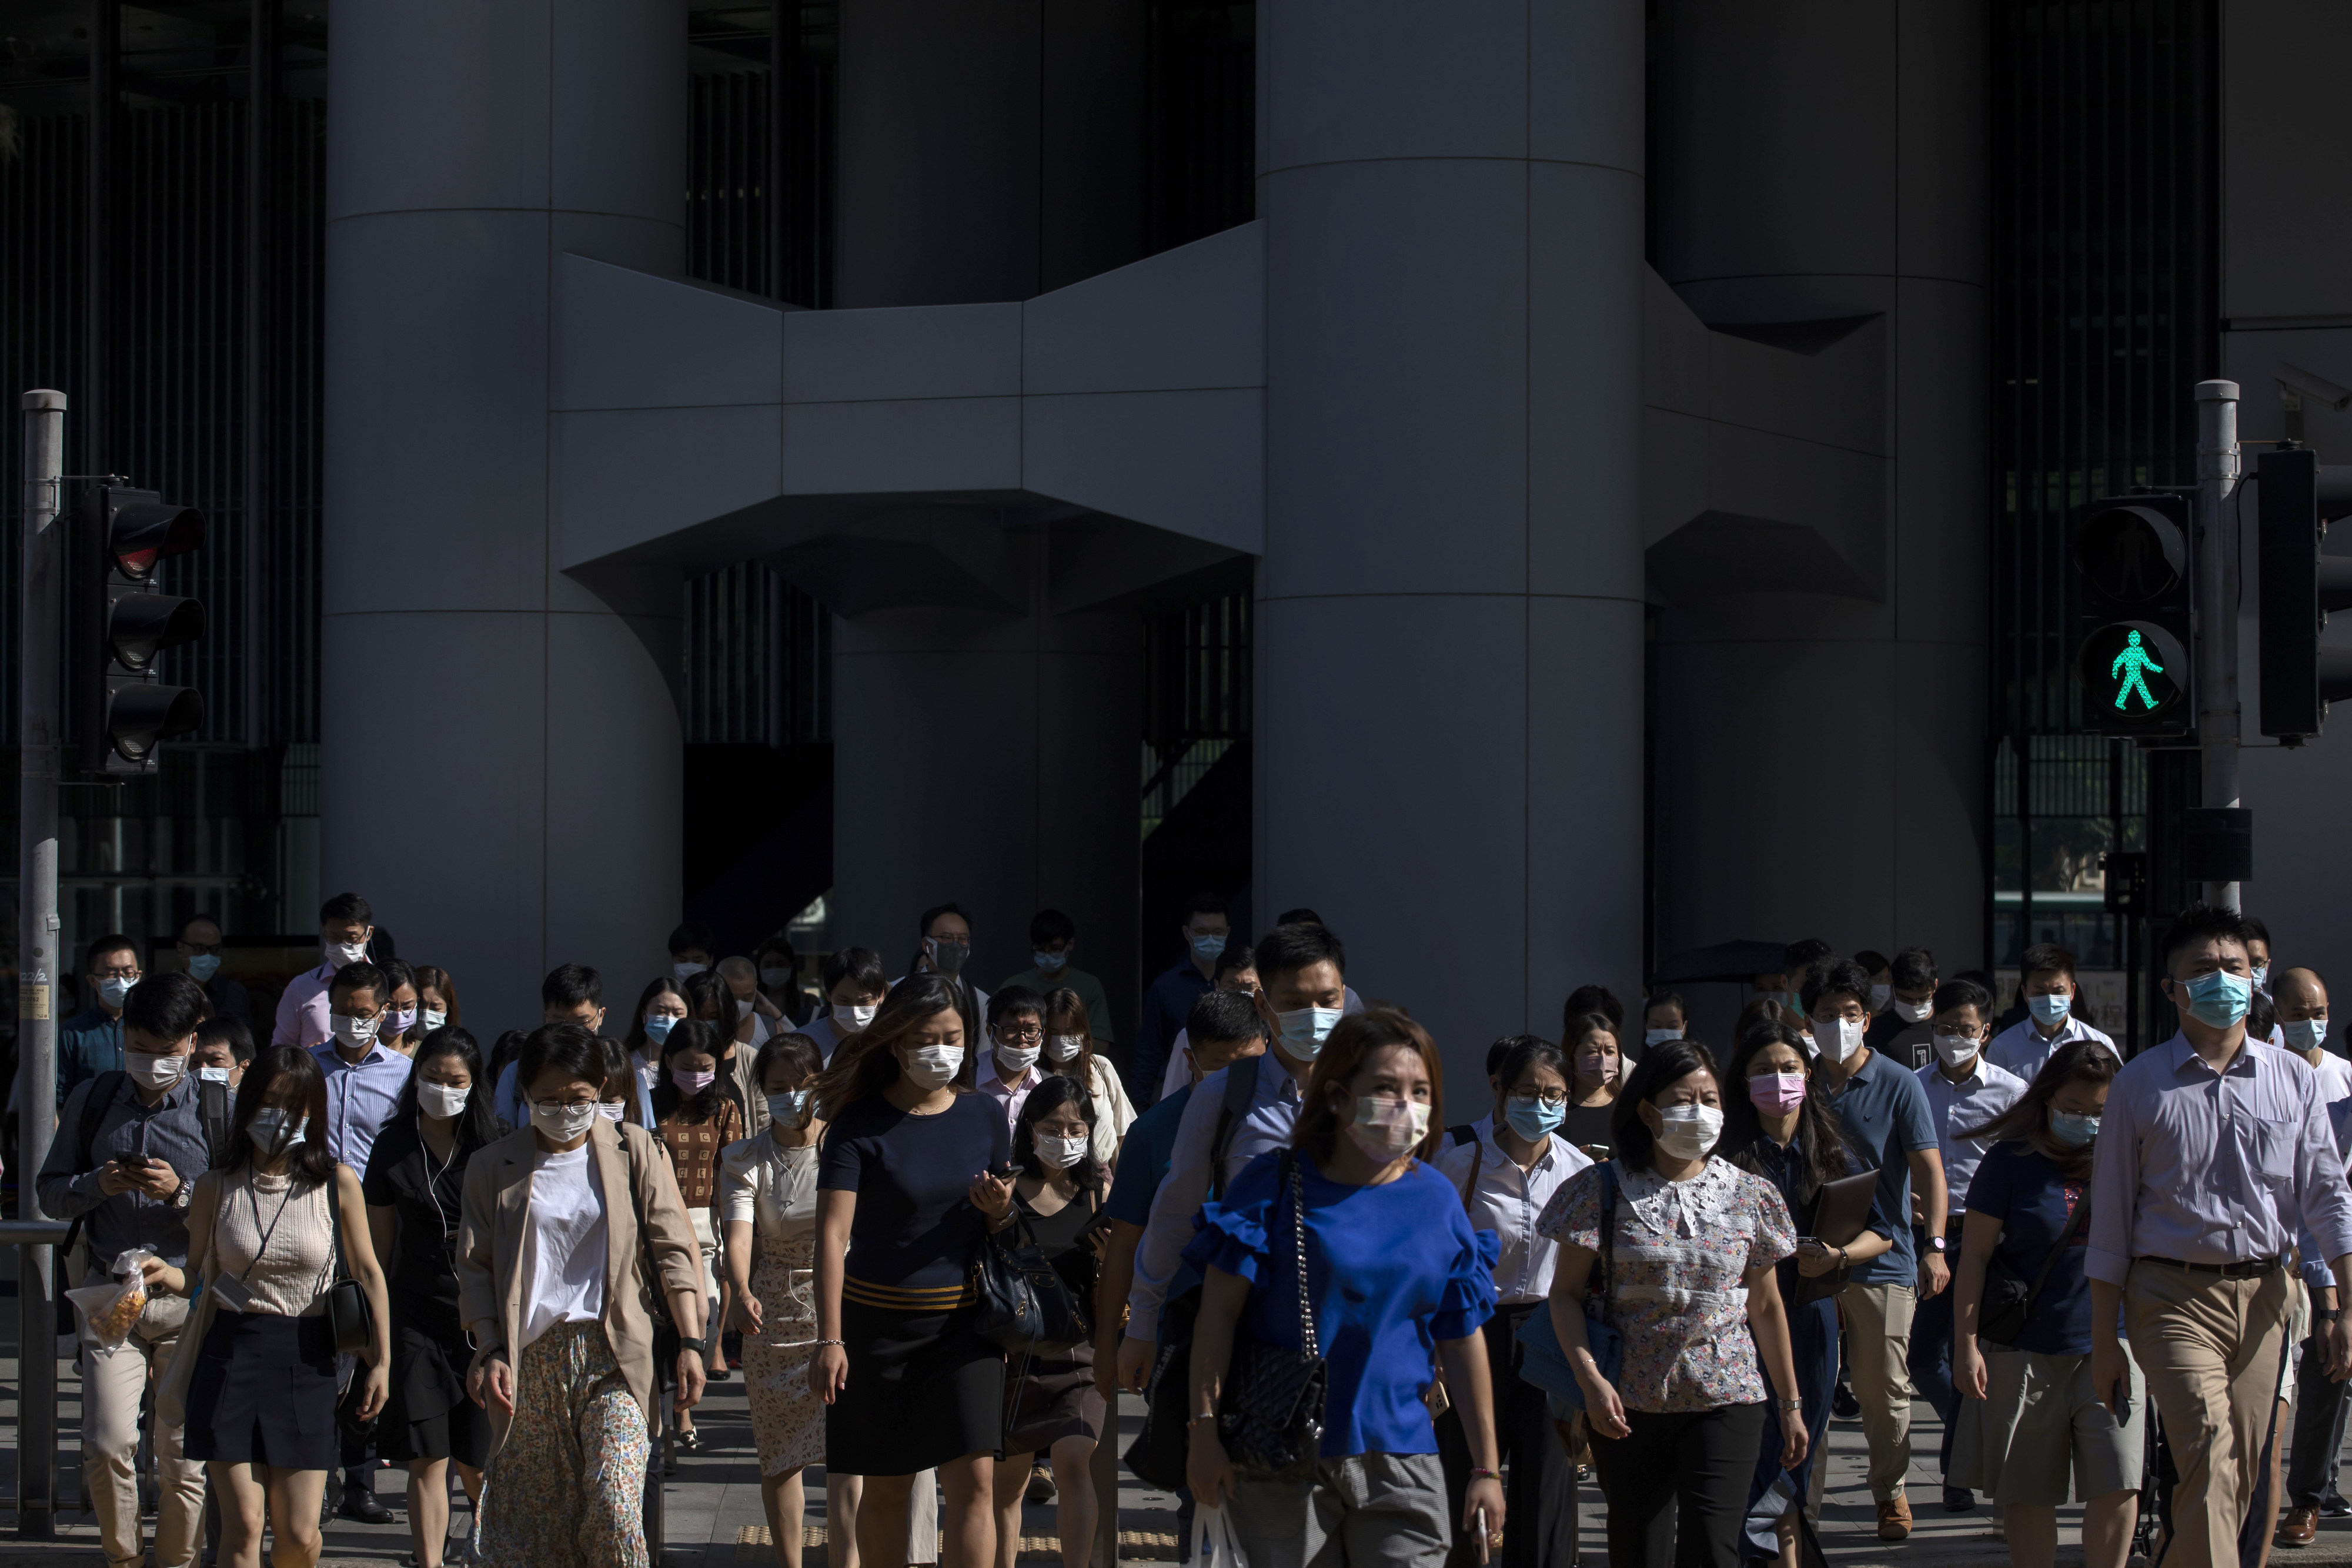 Morning commuters cross a street in Hong Kong’s Central district on August 18. Many women reach the height of their career and leadership capability at the same time that they enter perimenopause and menopause. Photo: Bloomberg